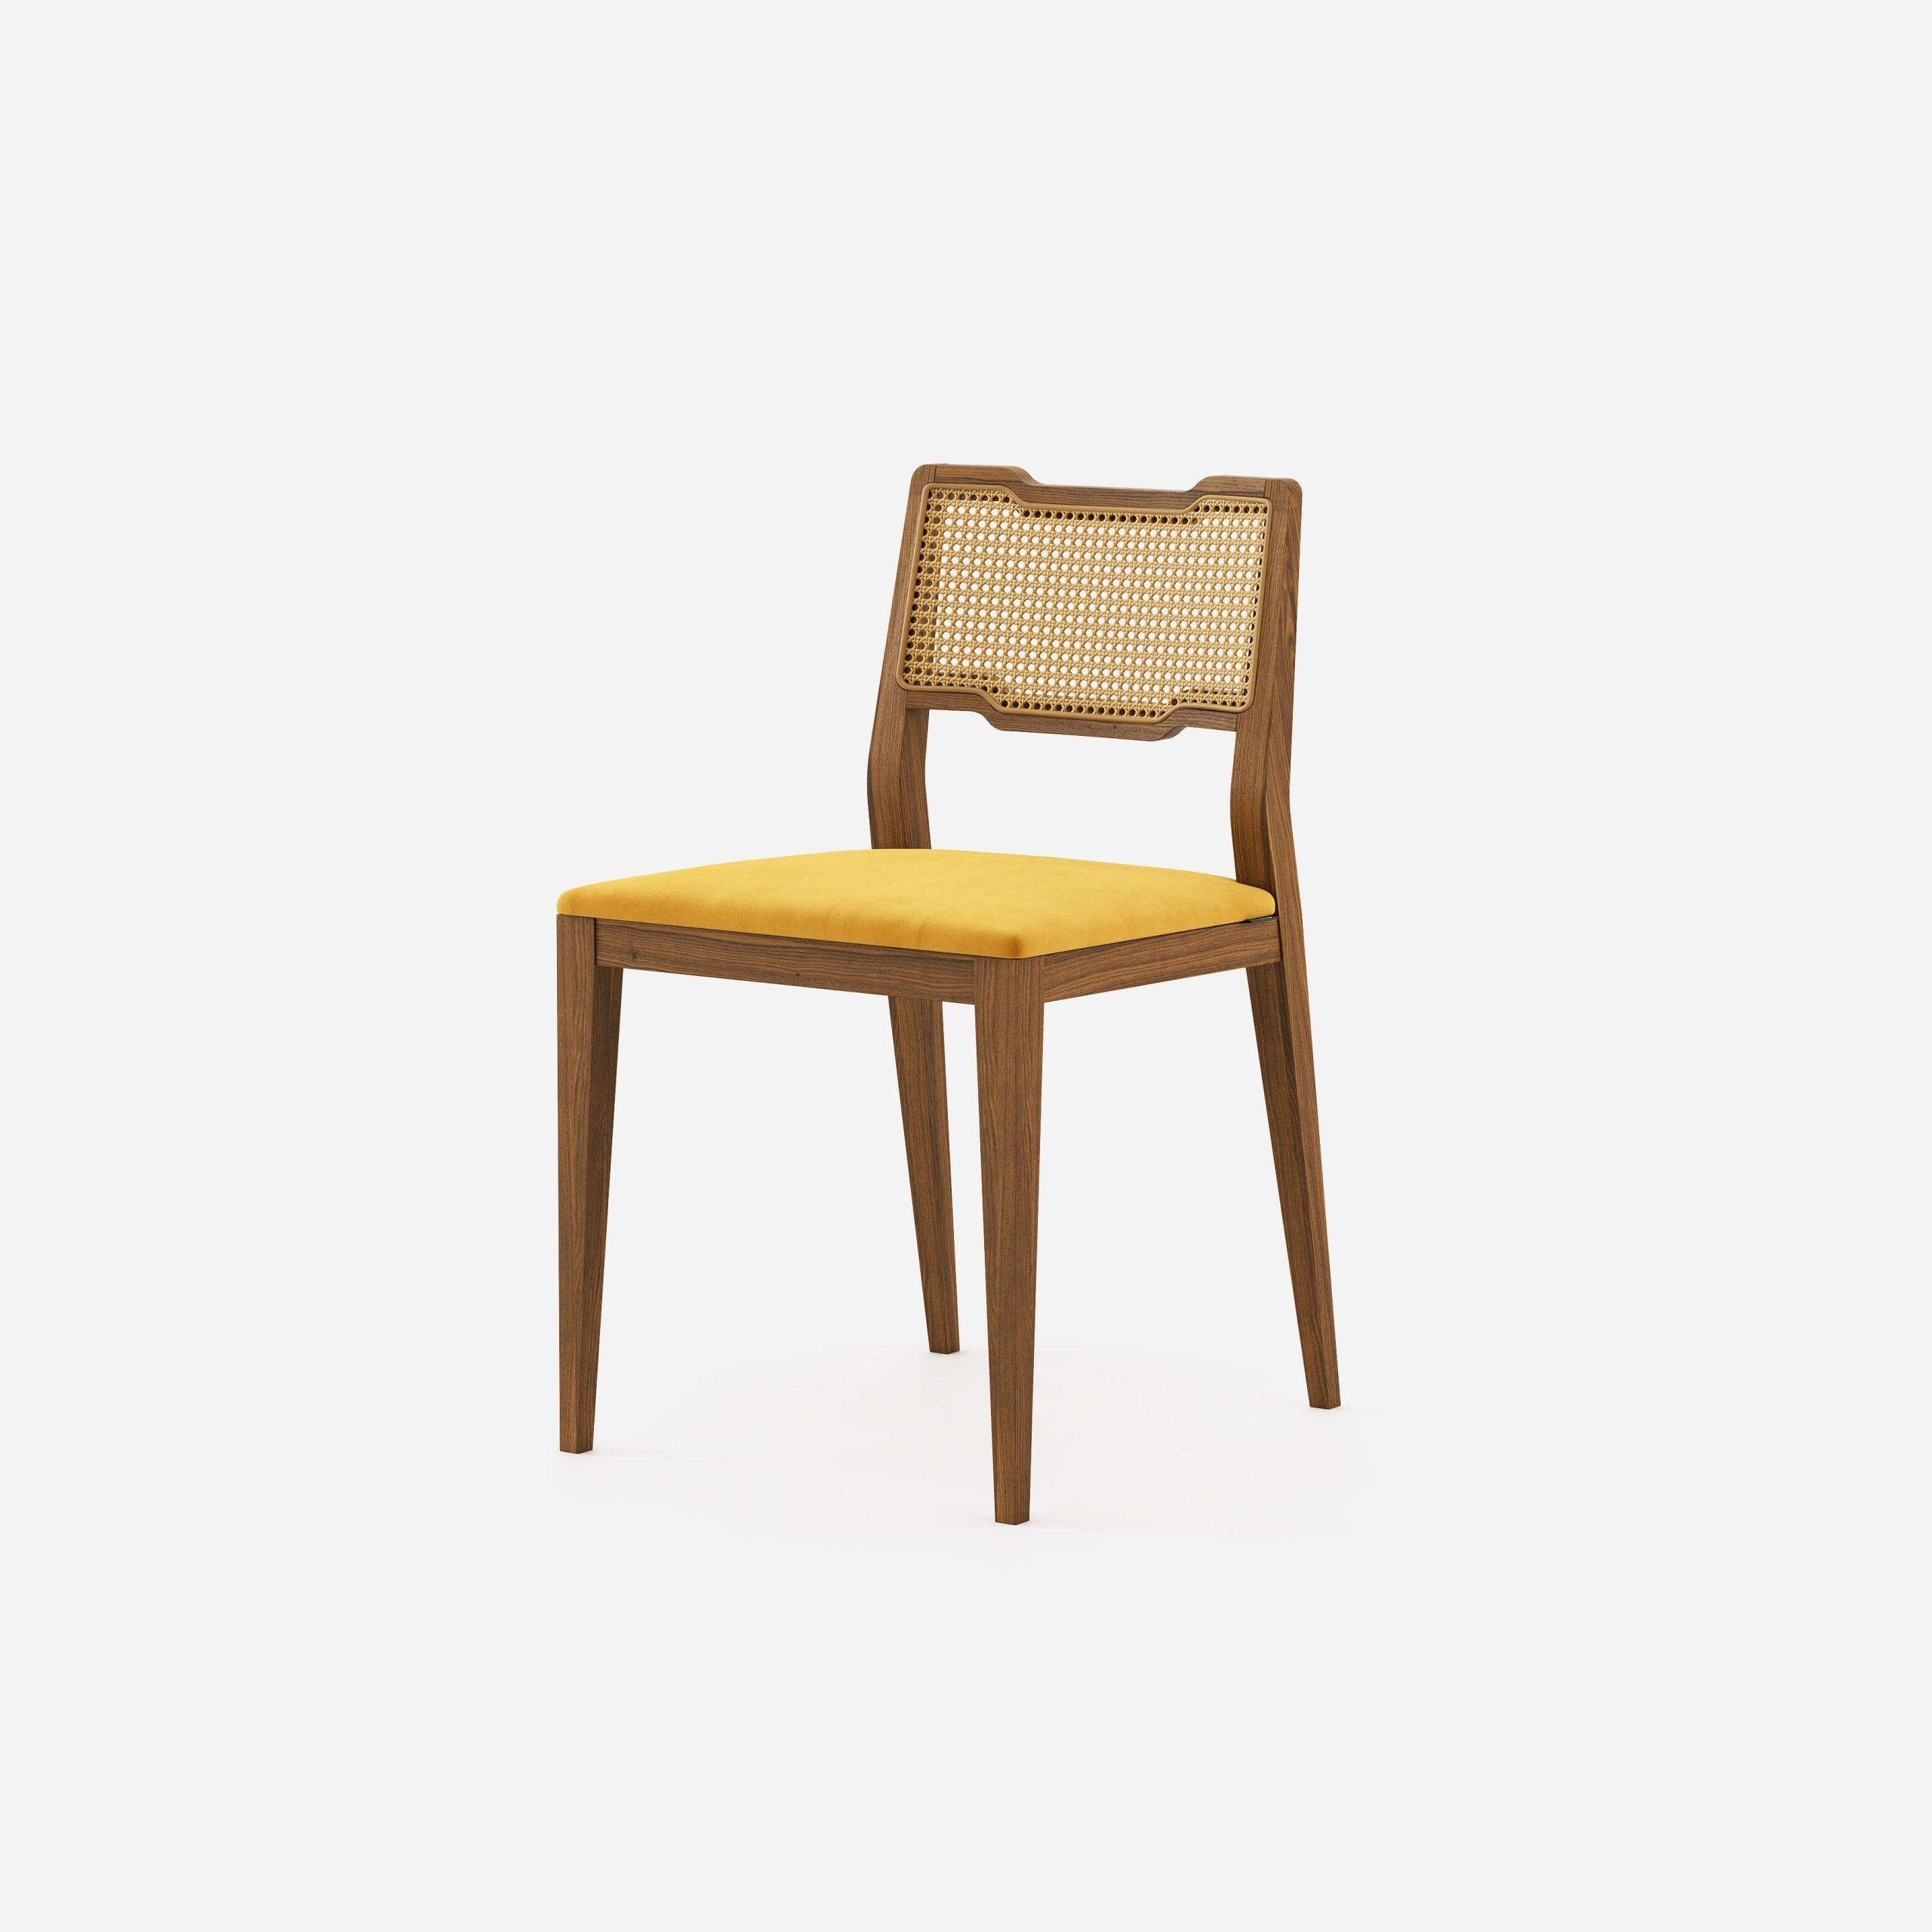 European Contemporary Dining Chairs Crafted of Matte Walnut and Woven Cane Work For Sale